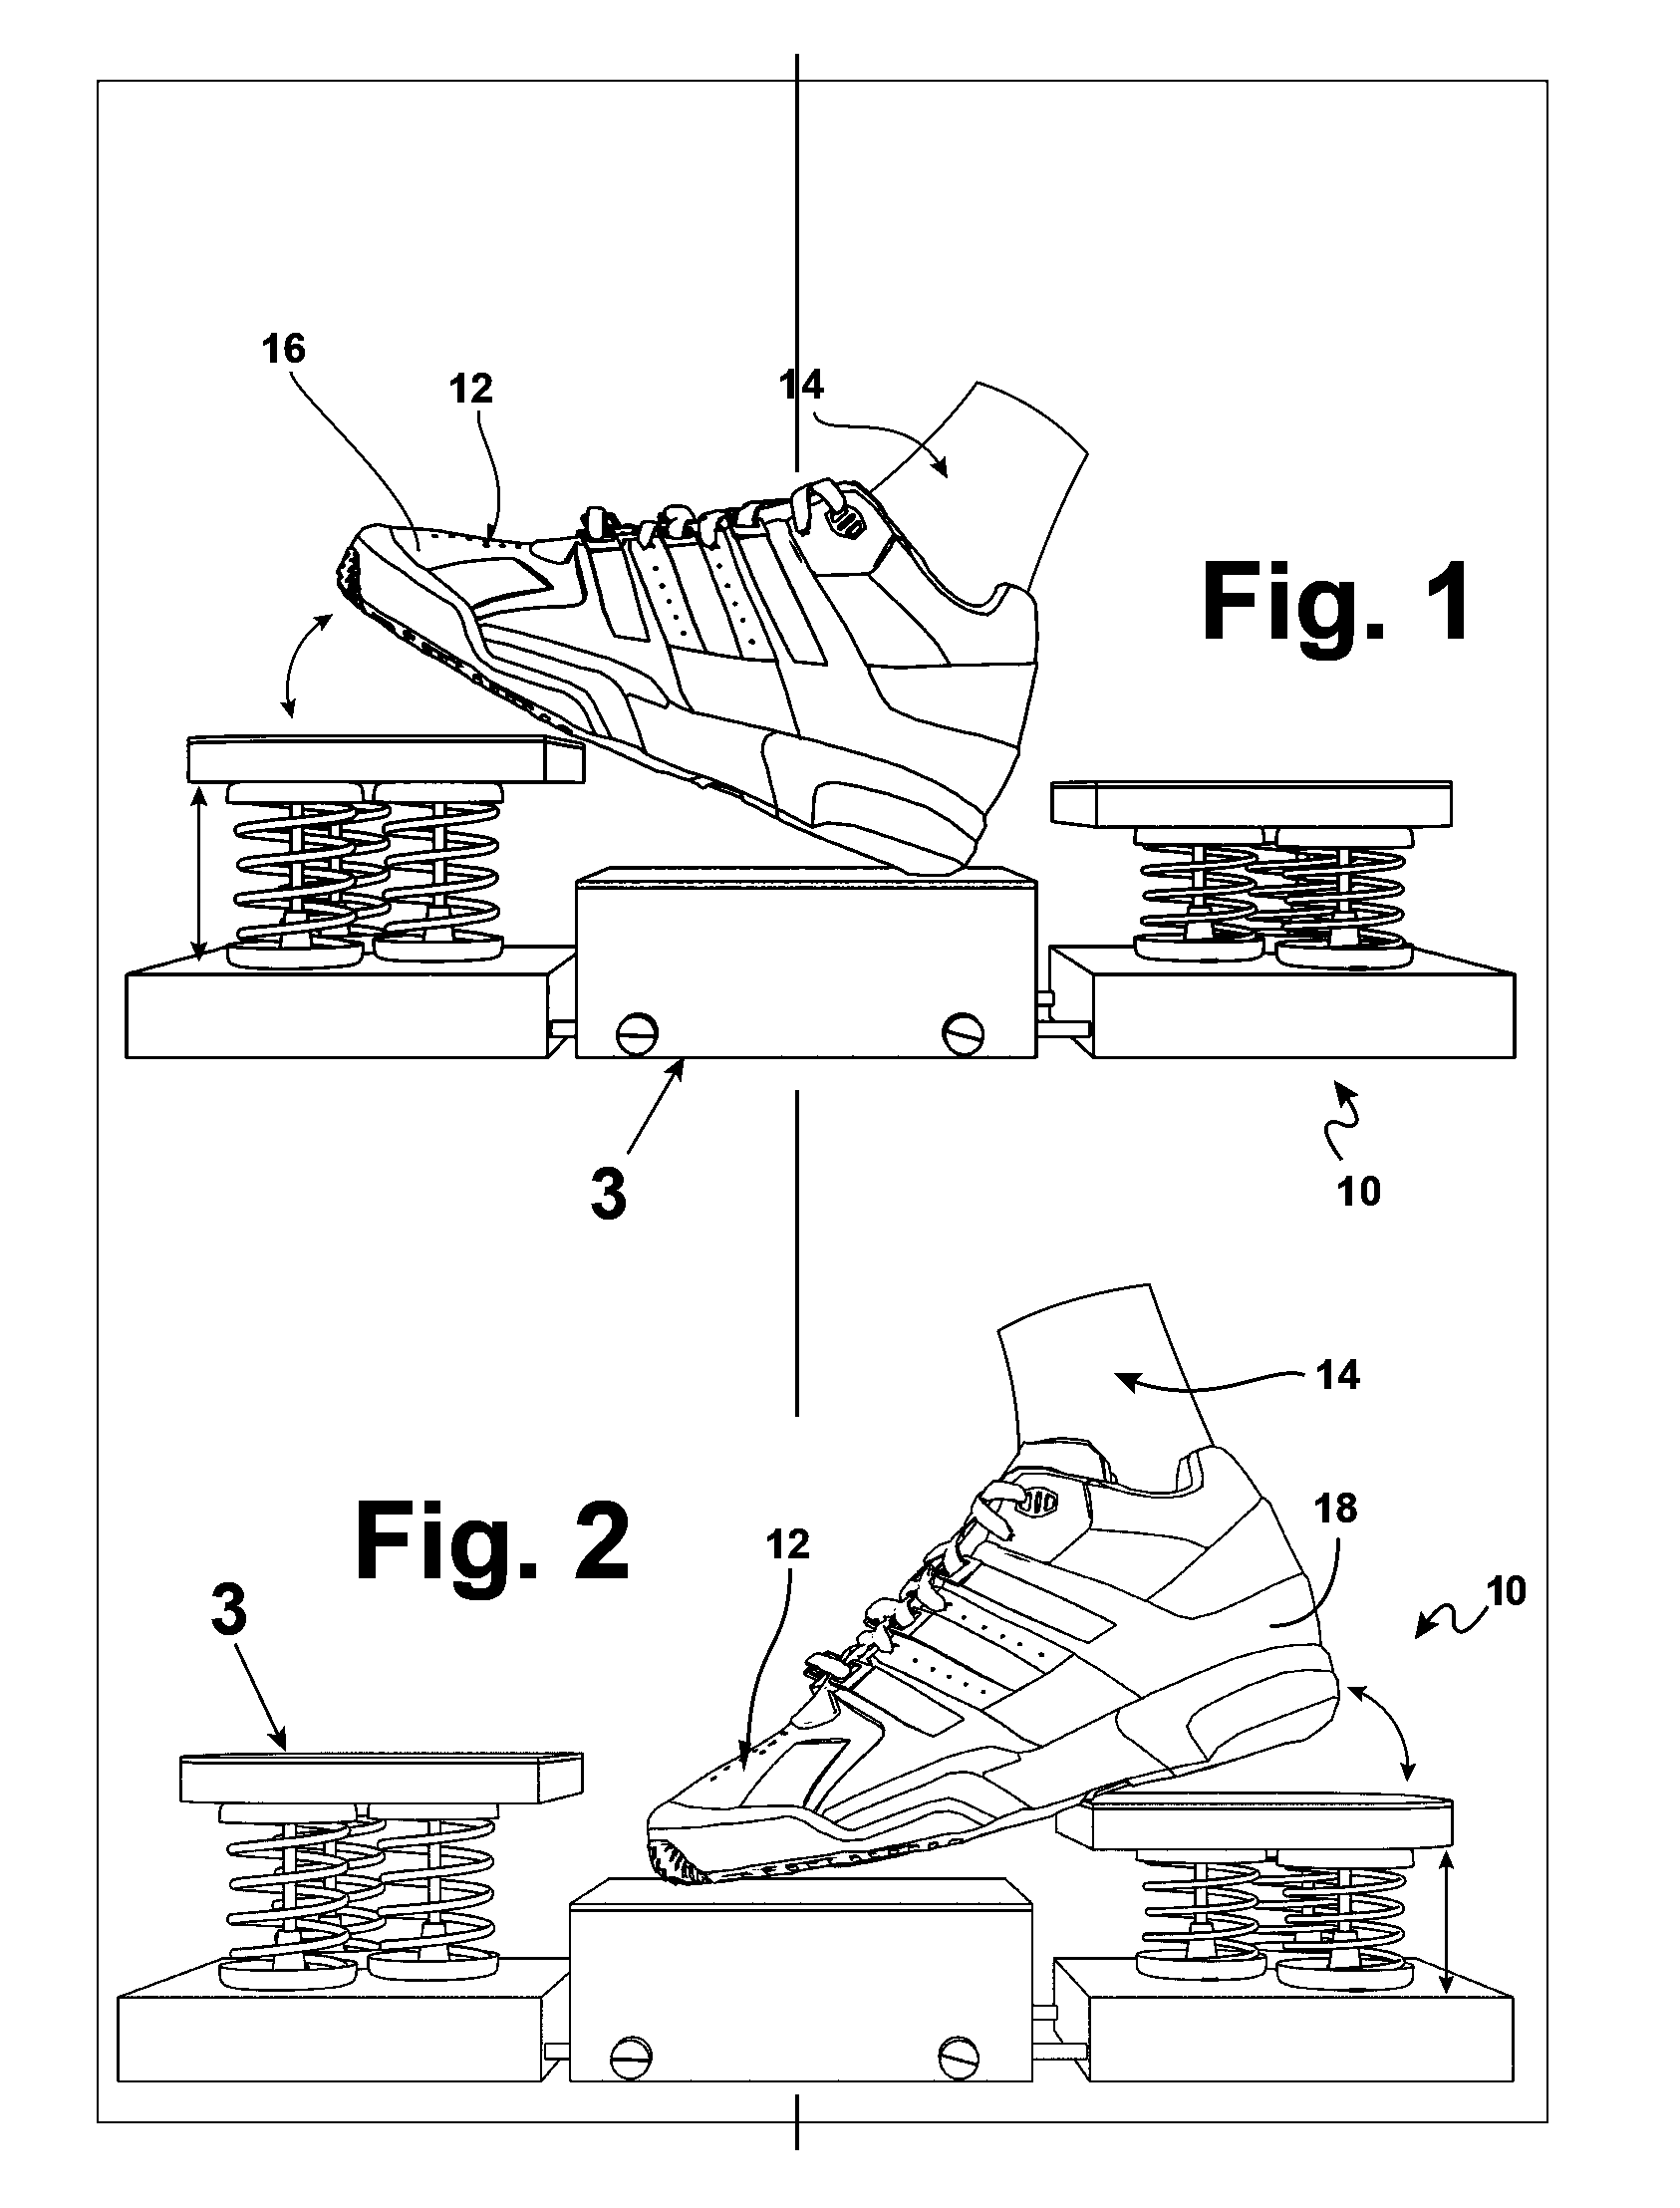 Foot exercise device